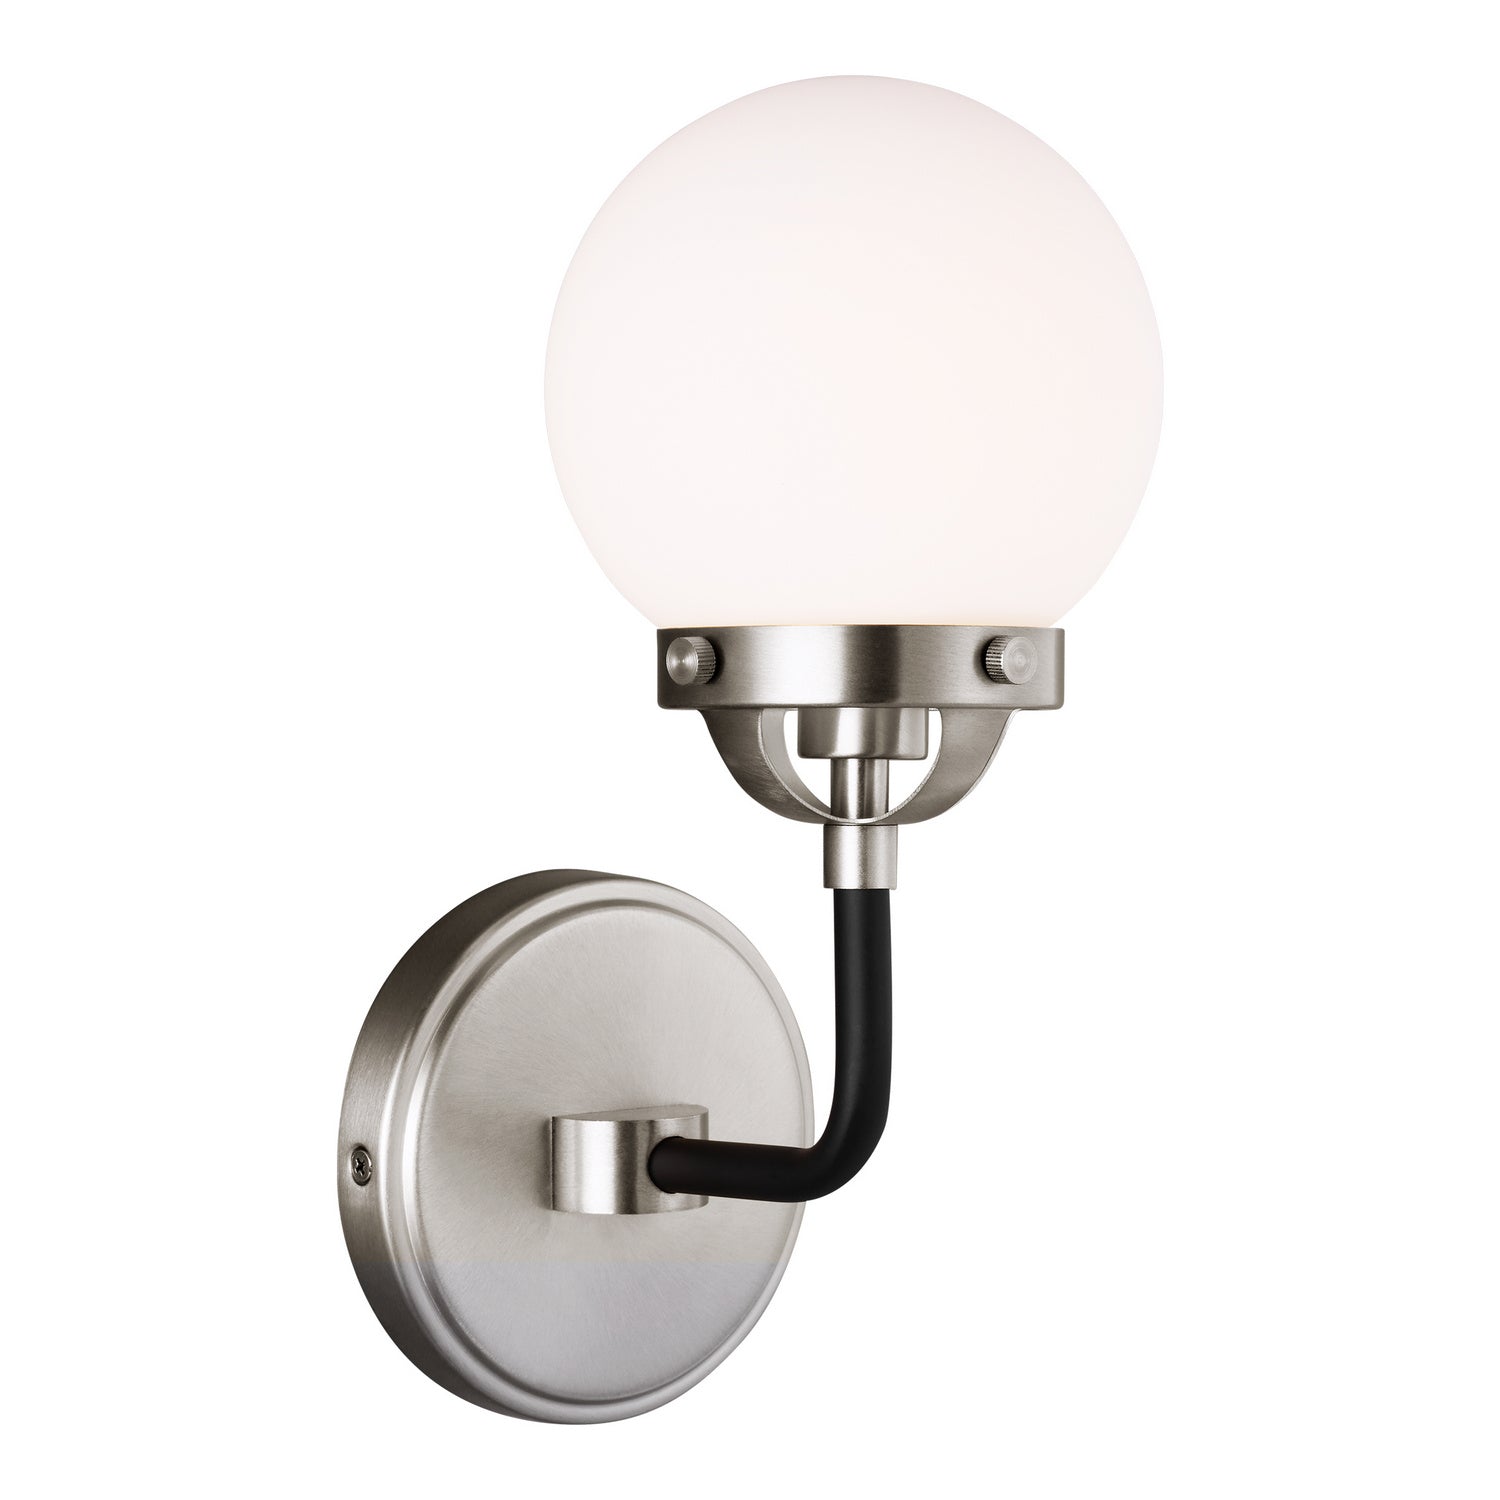 Visual Comfort Studio Canada - 4187901-962 - One Light Wall Sconce - Cafe - Brushed Nickel